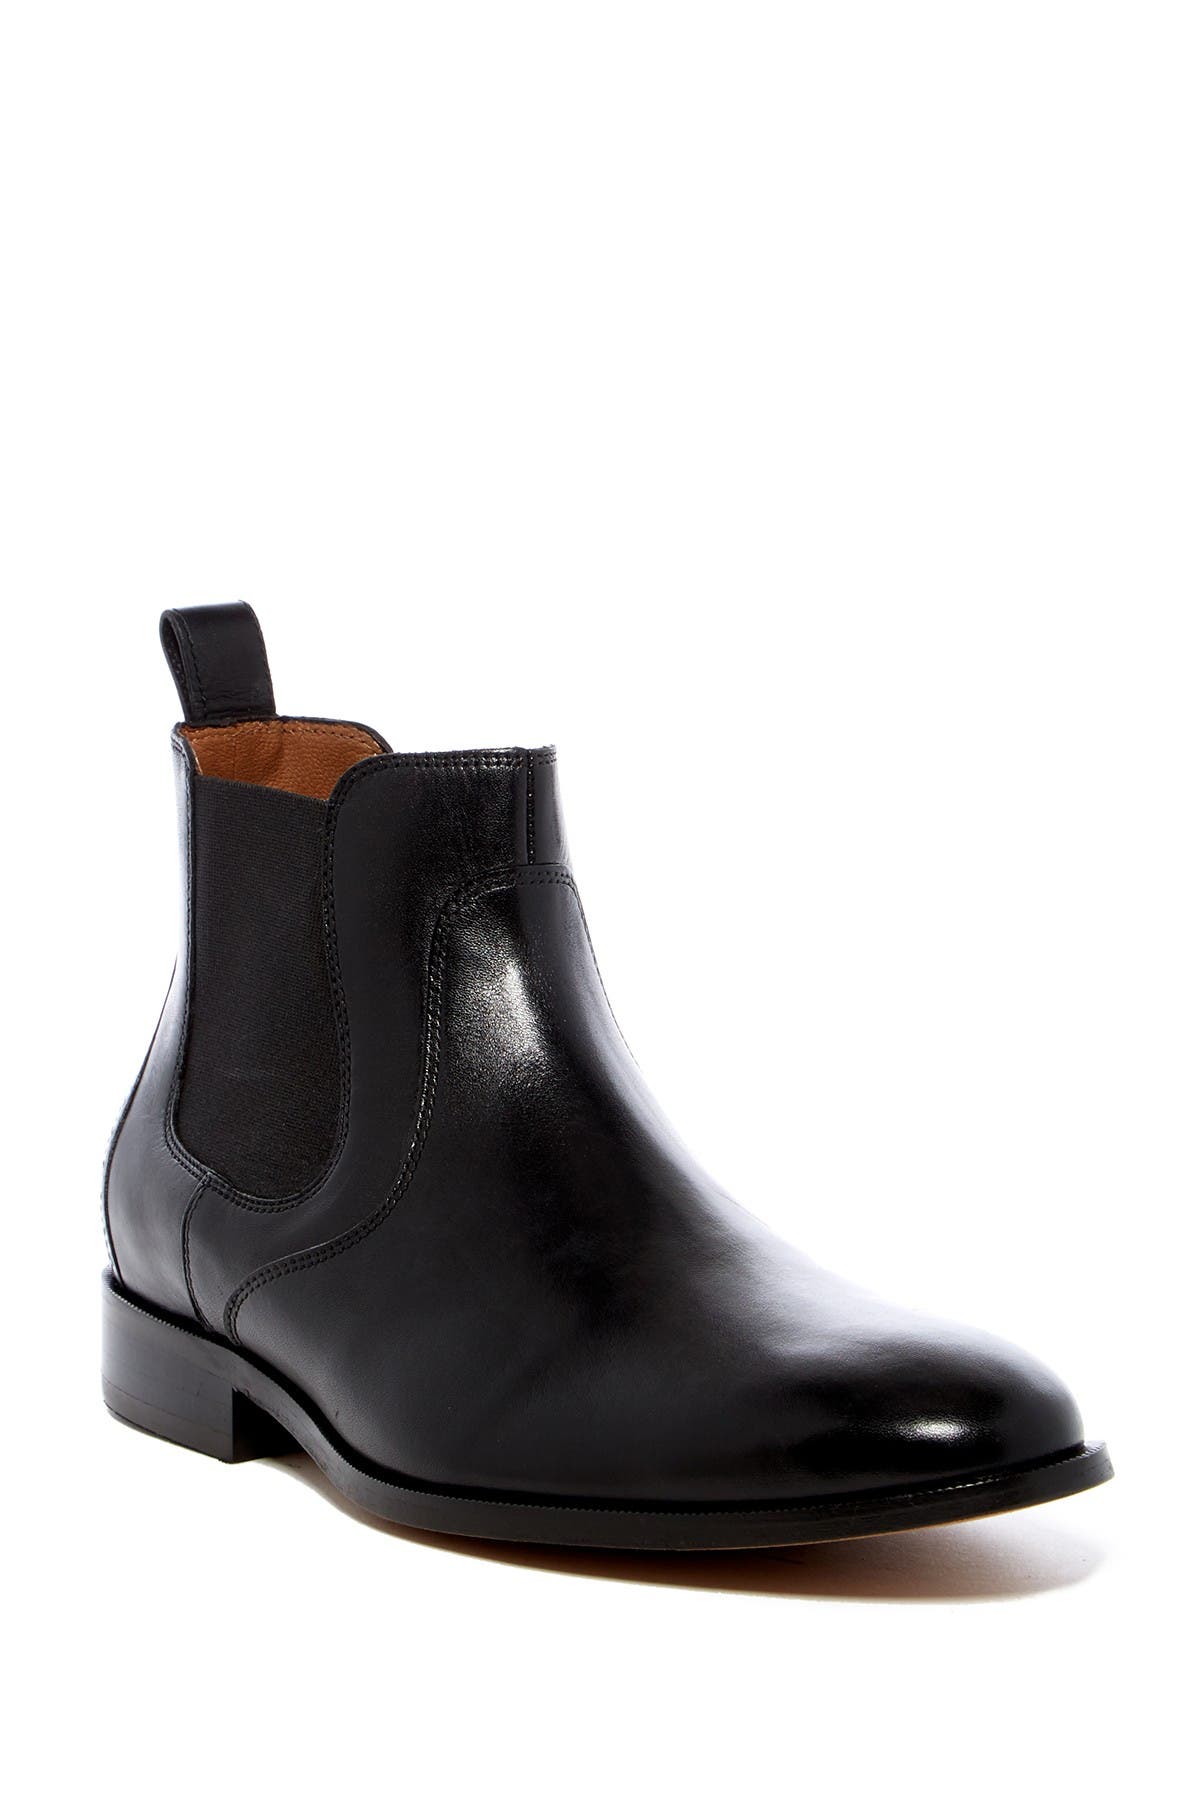 johnston and murphy black boots